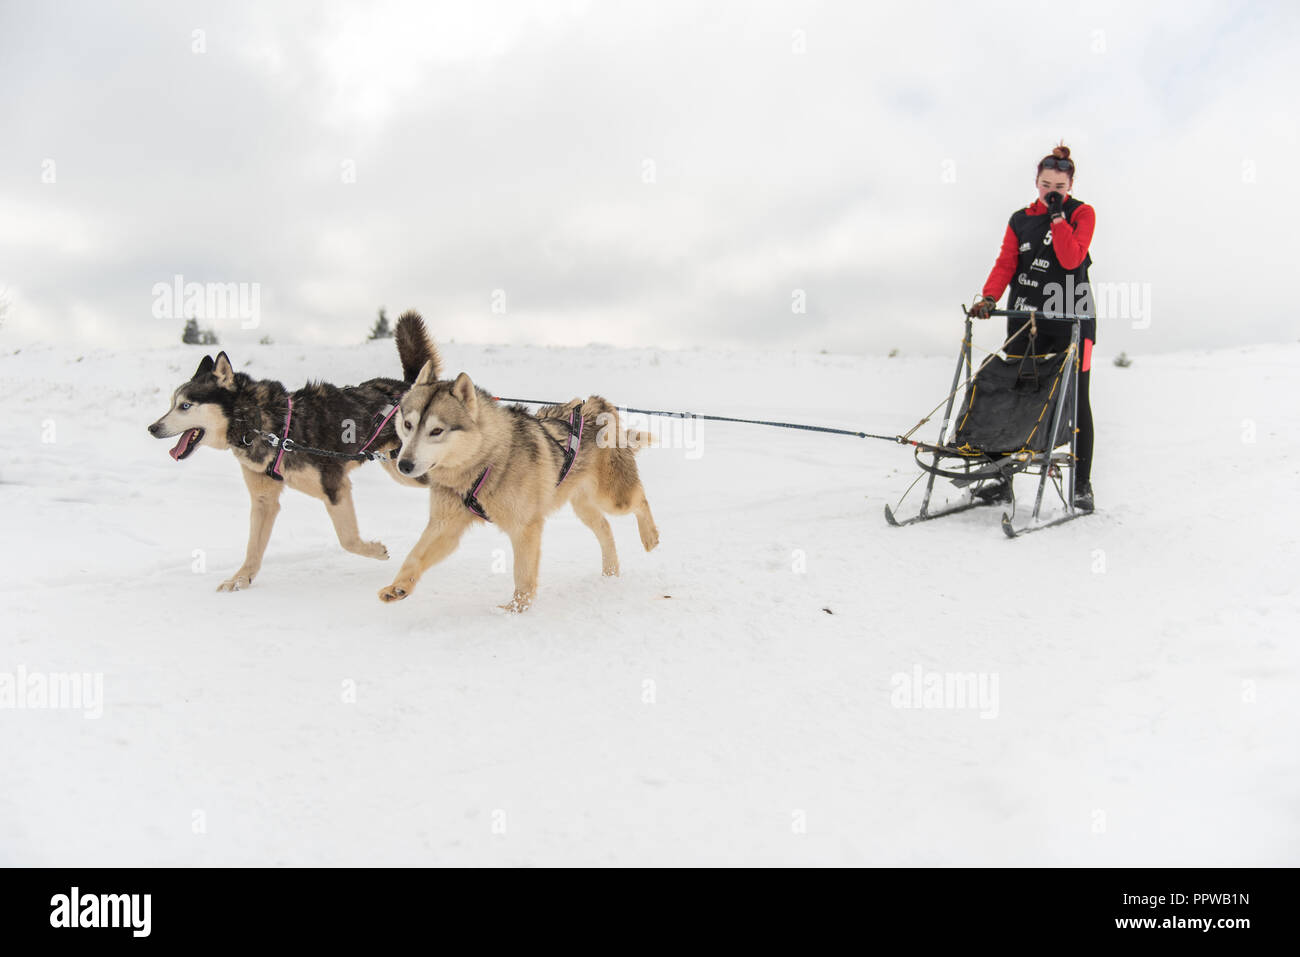 BELIS, ROMANIA - FEBRUARY 17, 2018: Musher racing at a public dog sled race show with husky dogs in the Transylvanian mountains Stock Photo